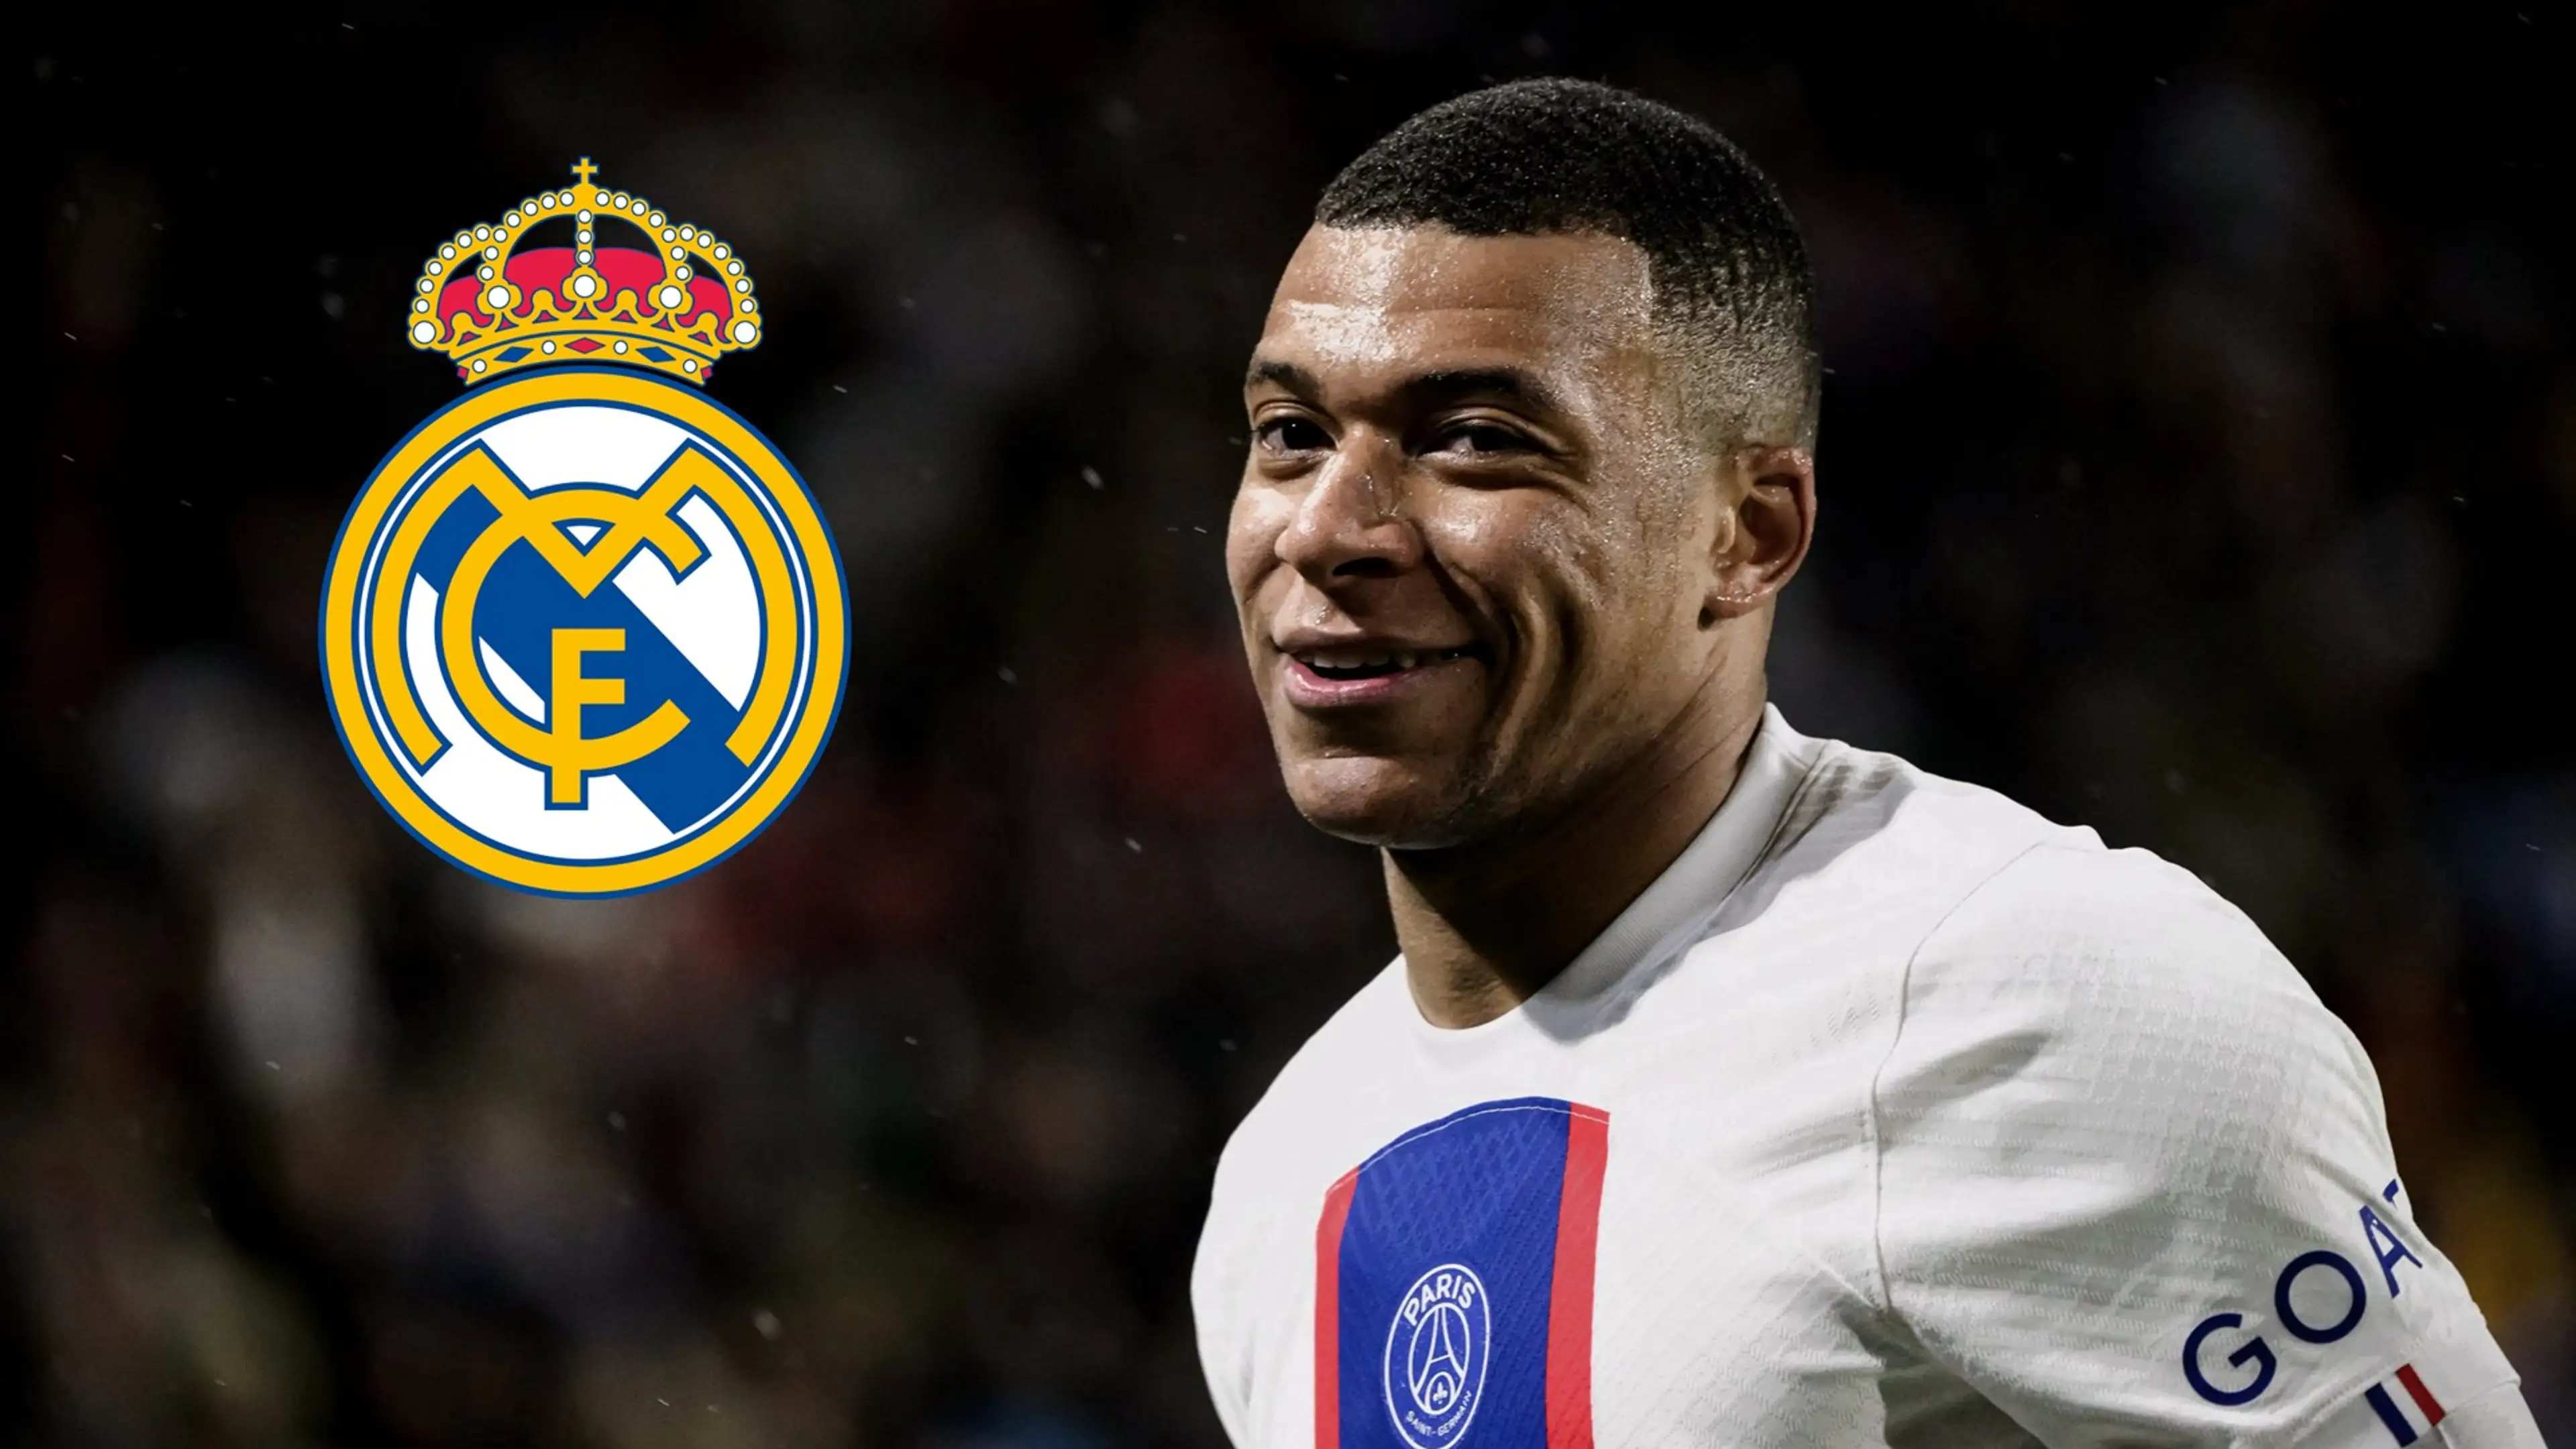 They offer things that drive you crazy - Perez suggests 'political and  economical' pressure forced Mbappe to snub Real Madrid in favor of PSG  contract extension